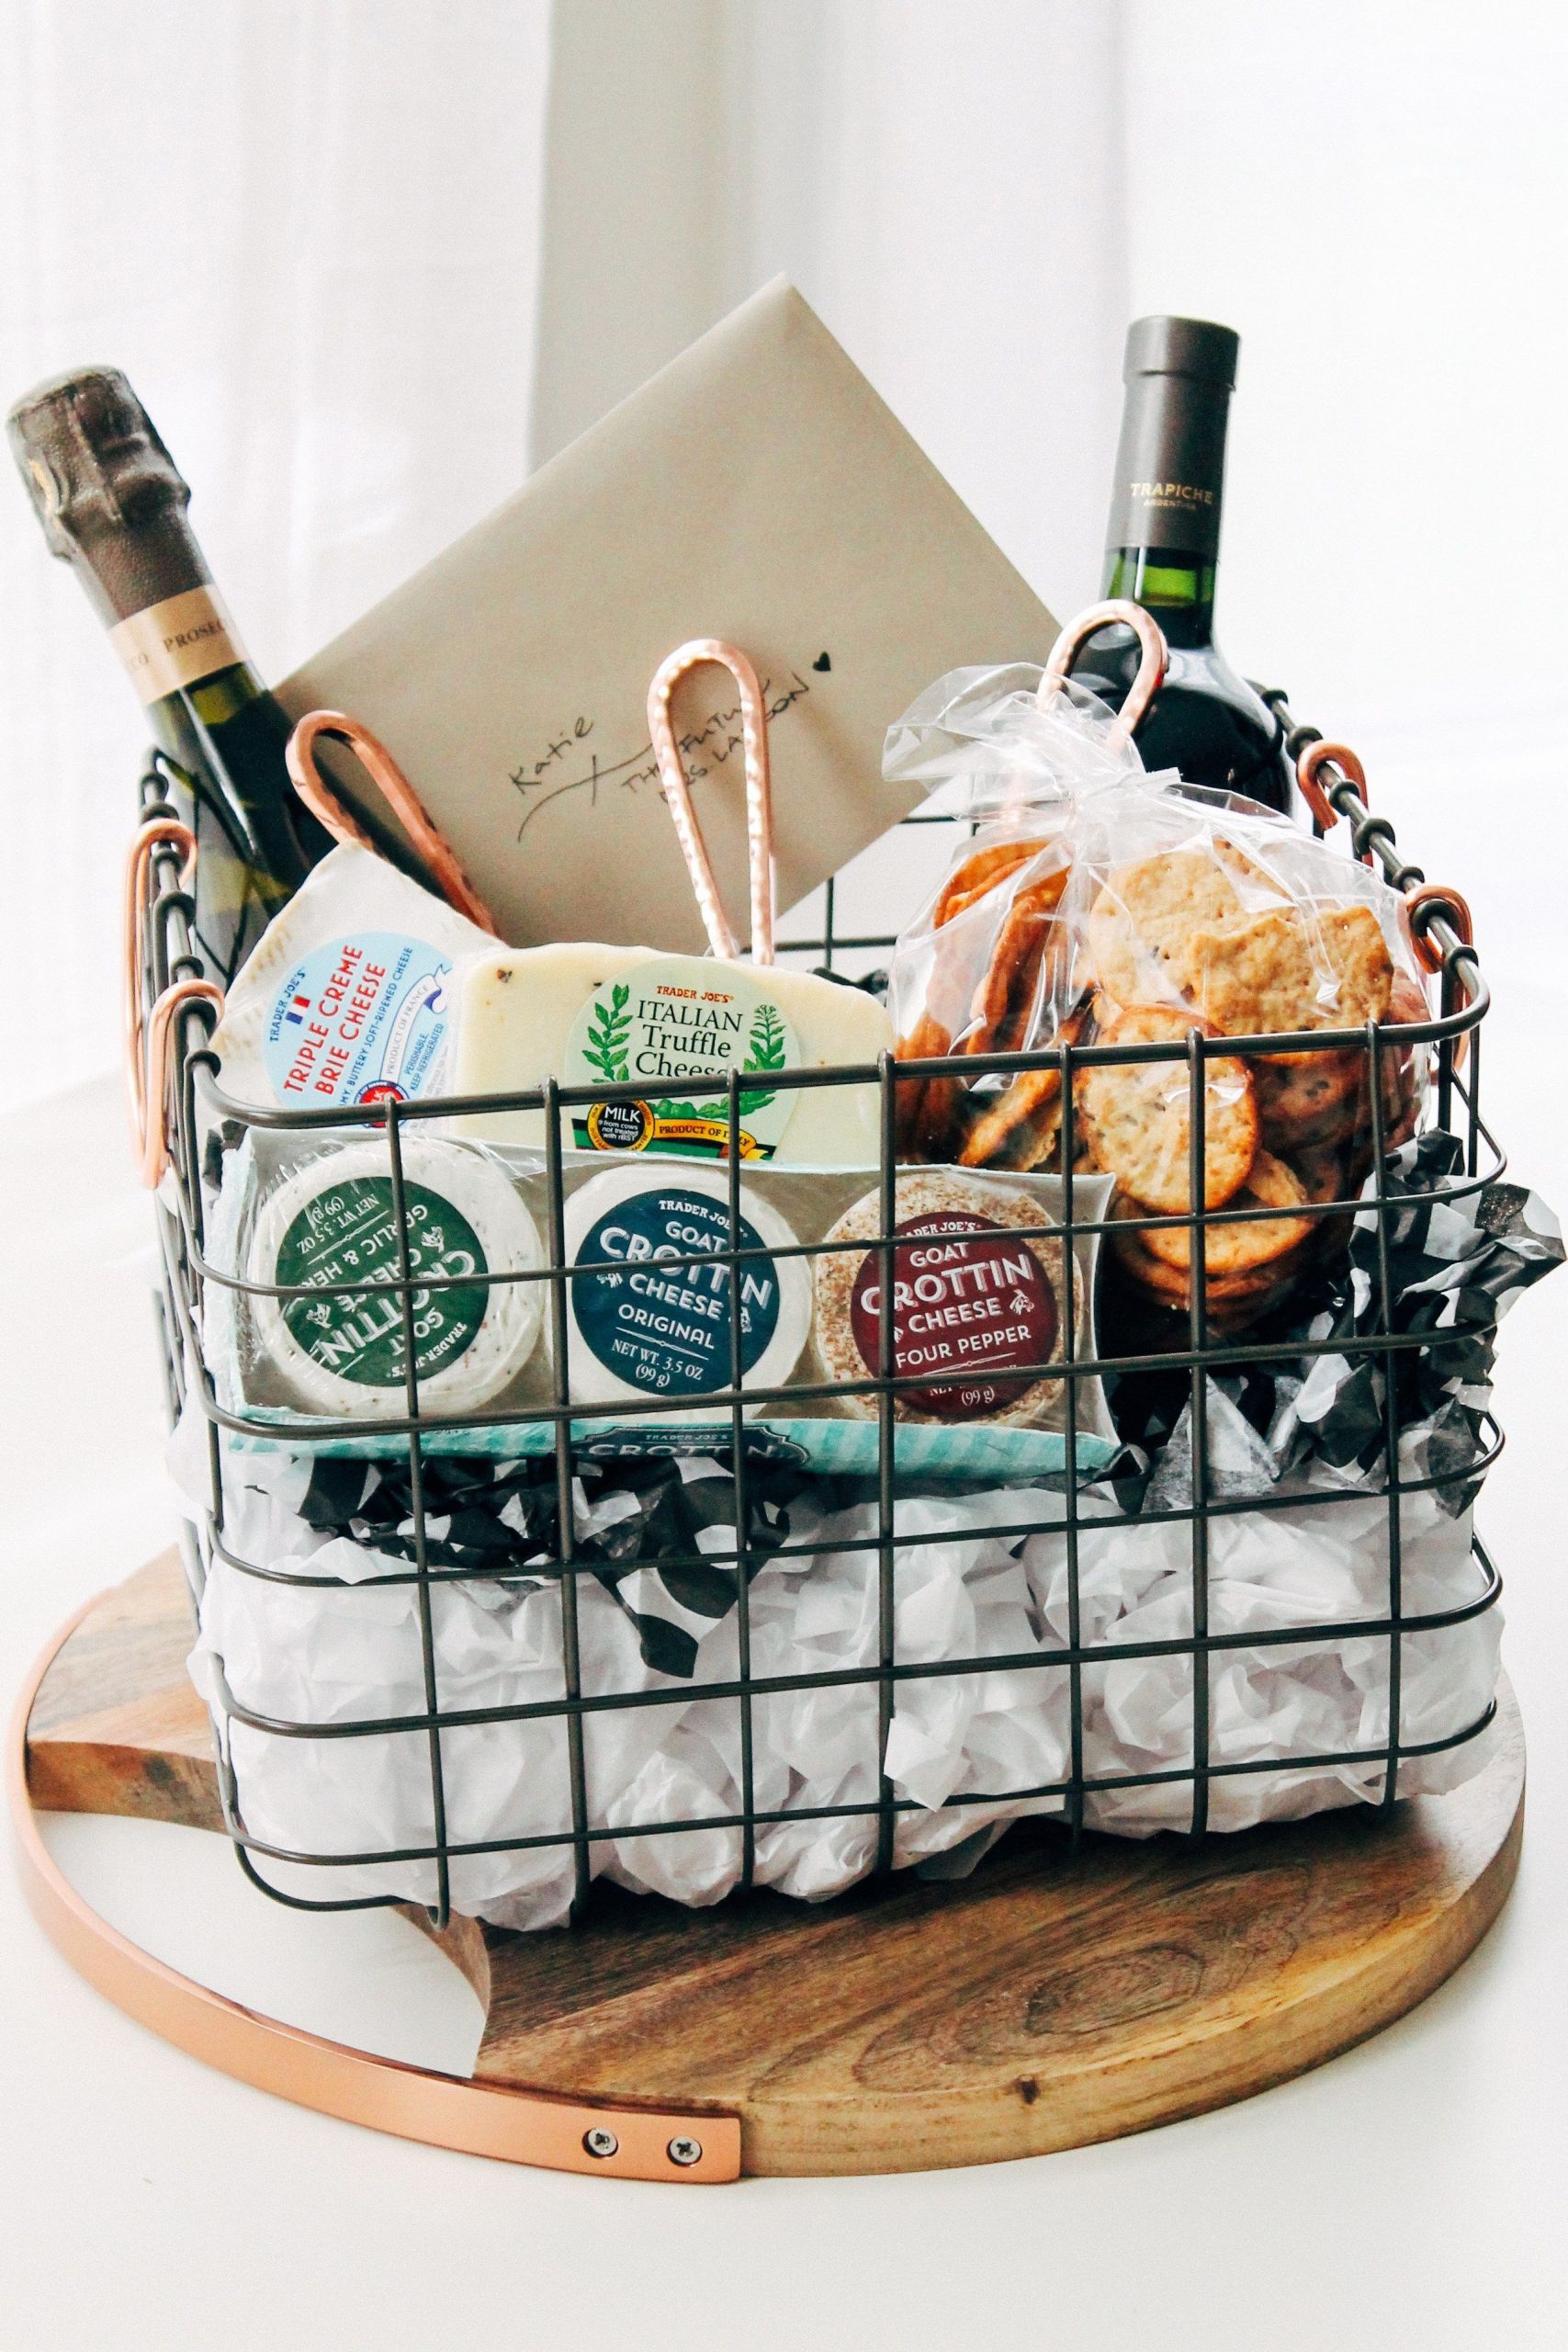 DIY Wine Gift Baskets Ideas
 the ultimate cheese t basket playswellwithbutter